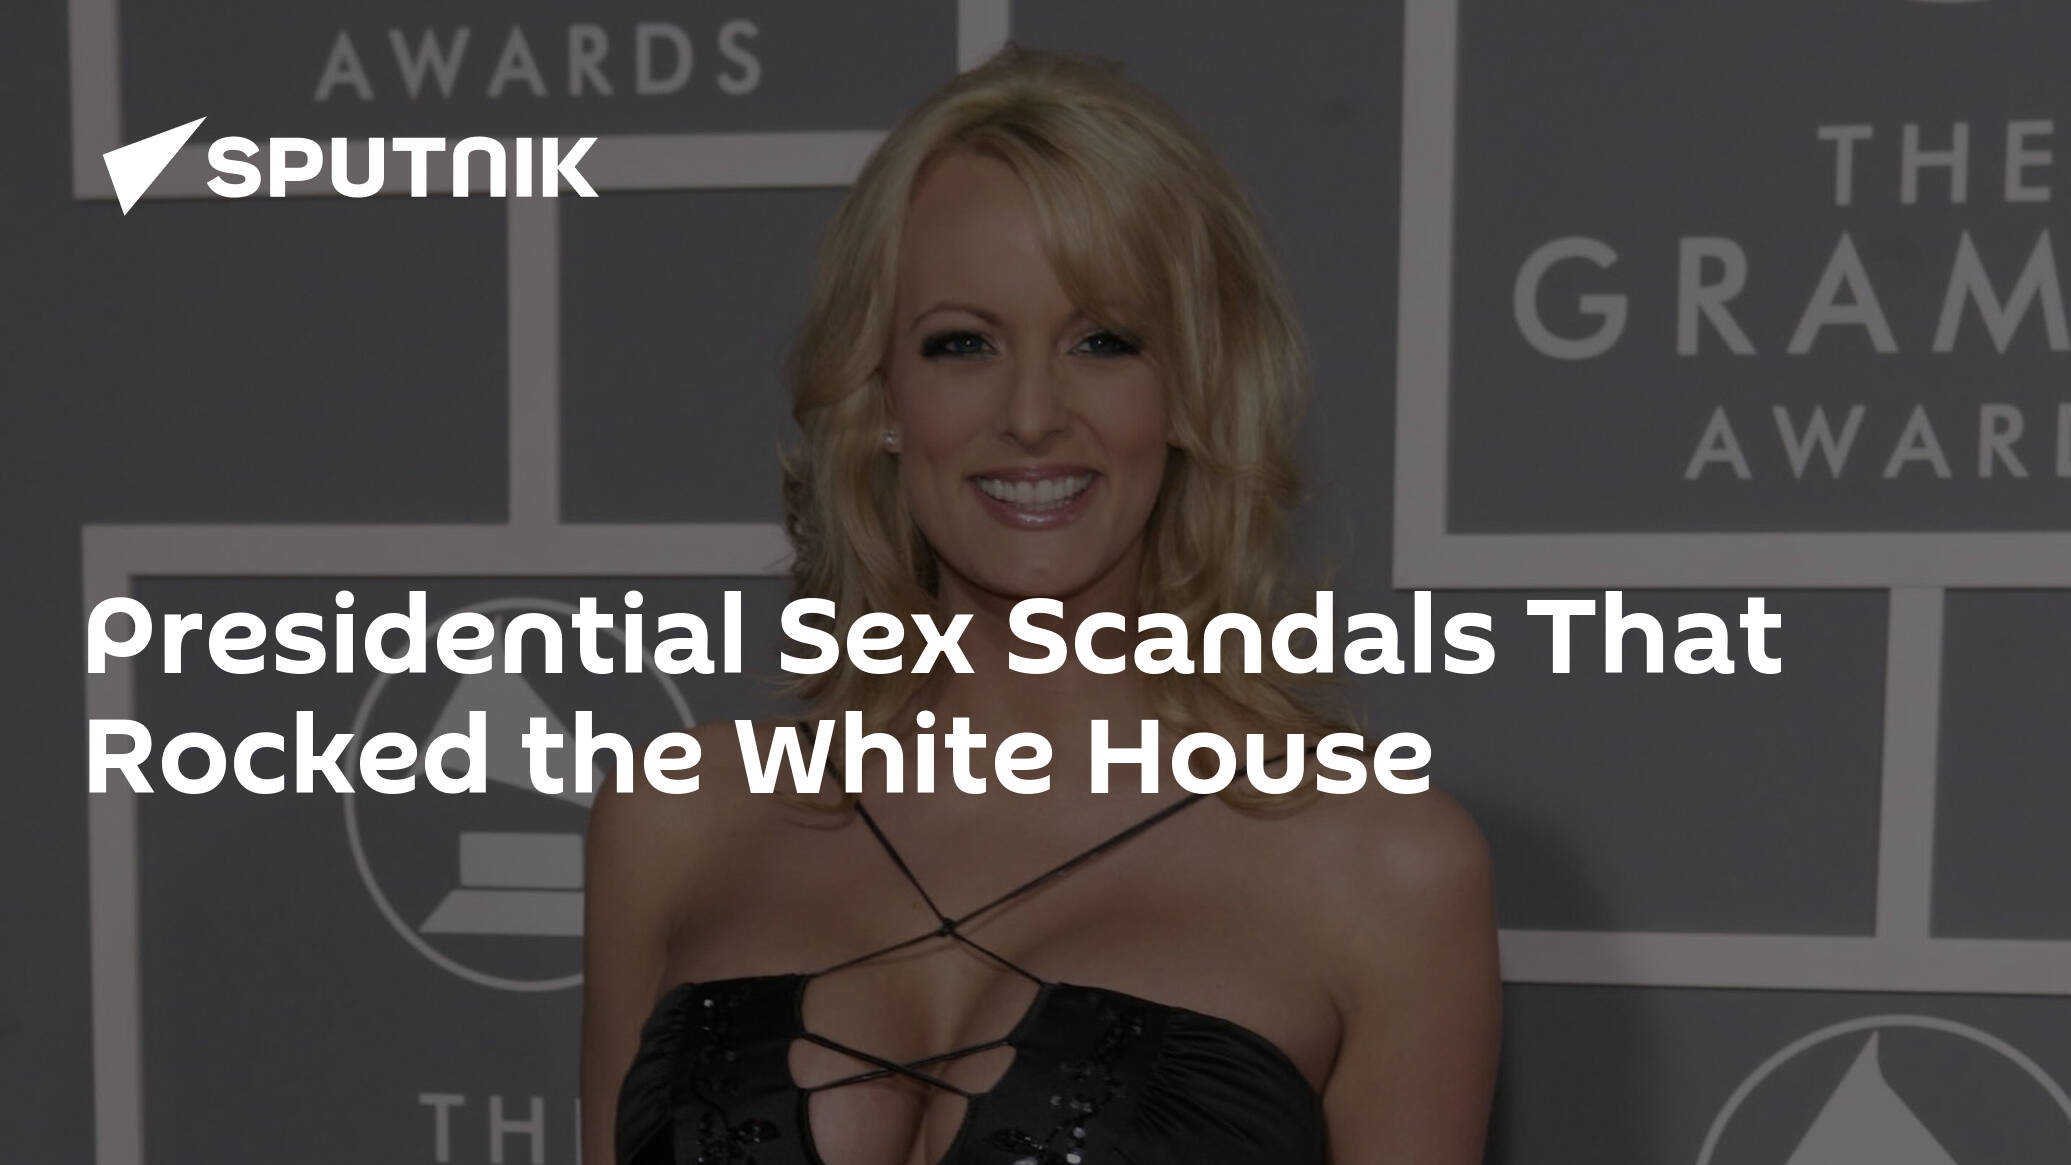 Presidential Sex Scandals That Rocked the White House pic